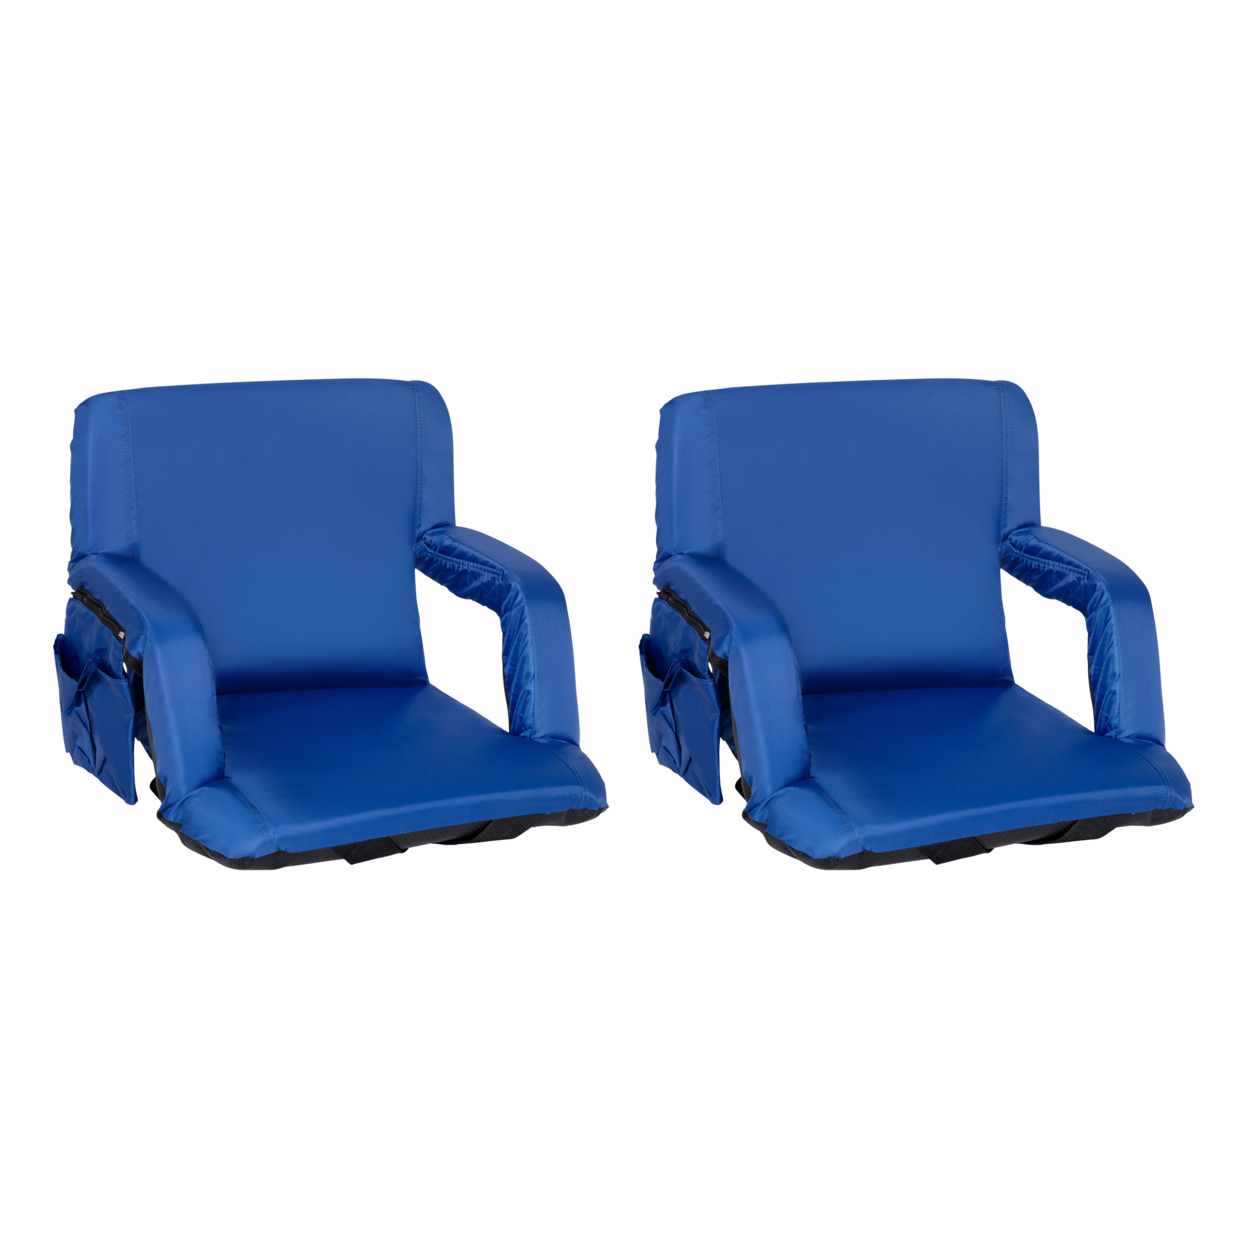 Set Of 2 Blue Portable Lightweight Reclining Stadium Chairs With Armrests, Padded Back & Seat - Storage Pockets & Backpack Straps